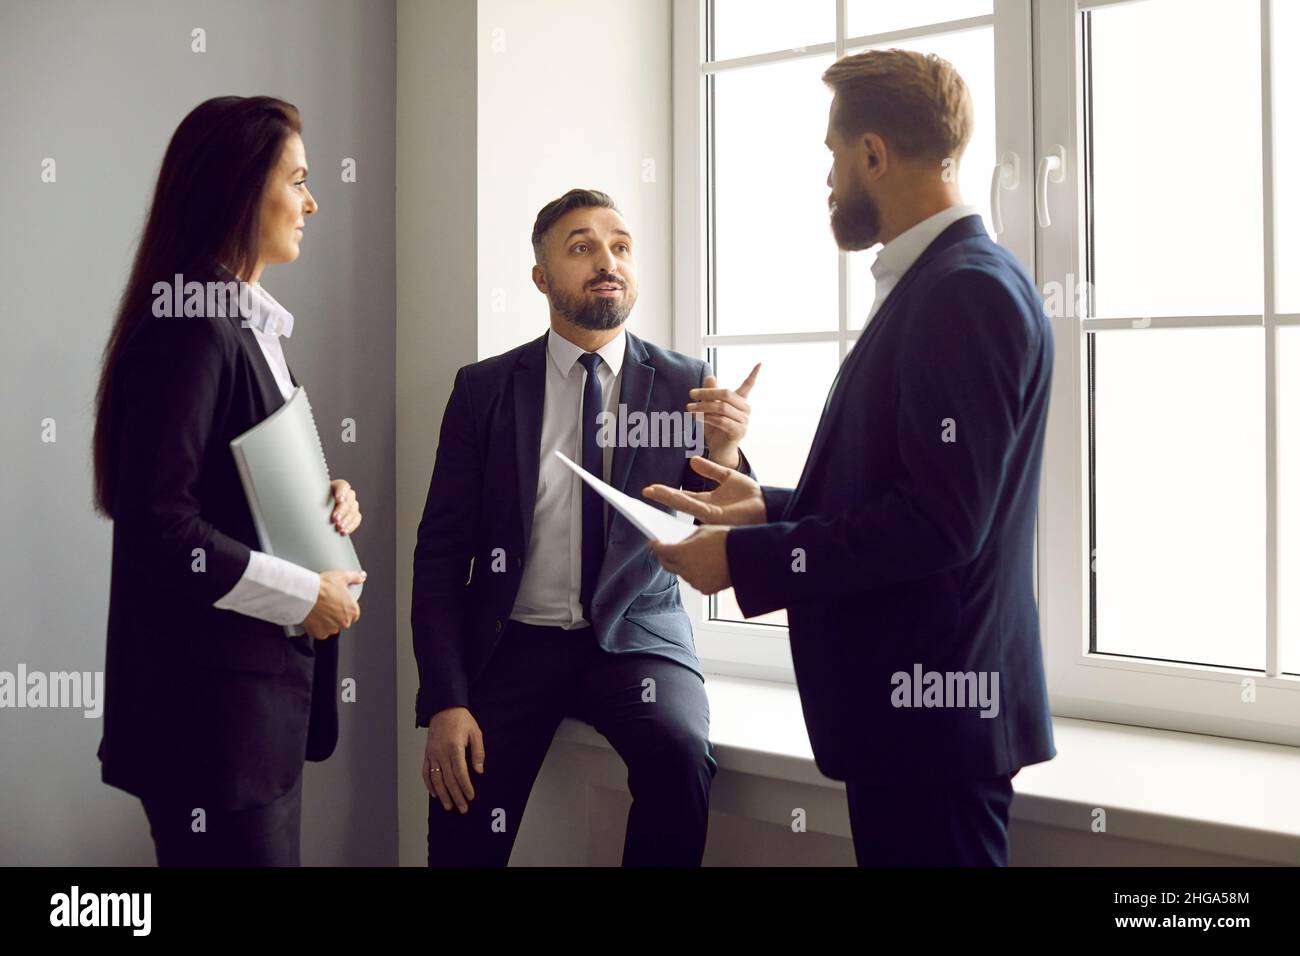 Team of business people standing in the office and discussing something work related Stock Photo